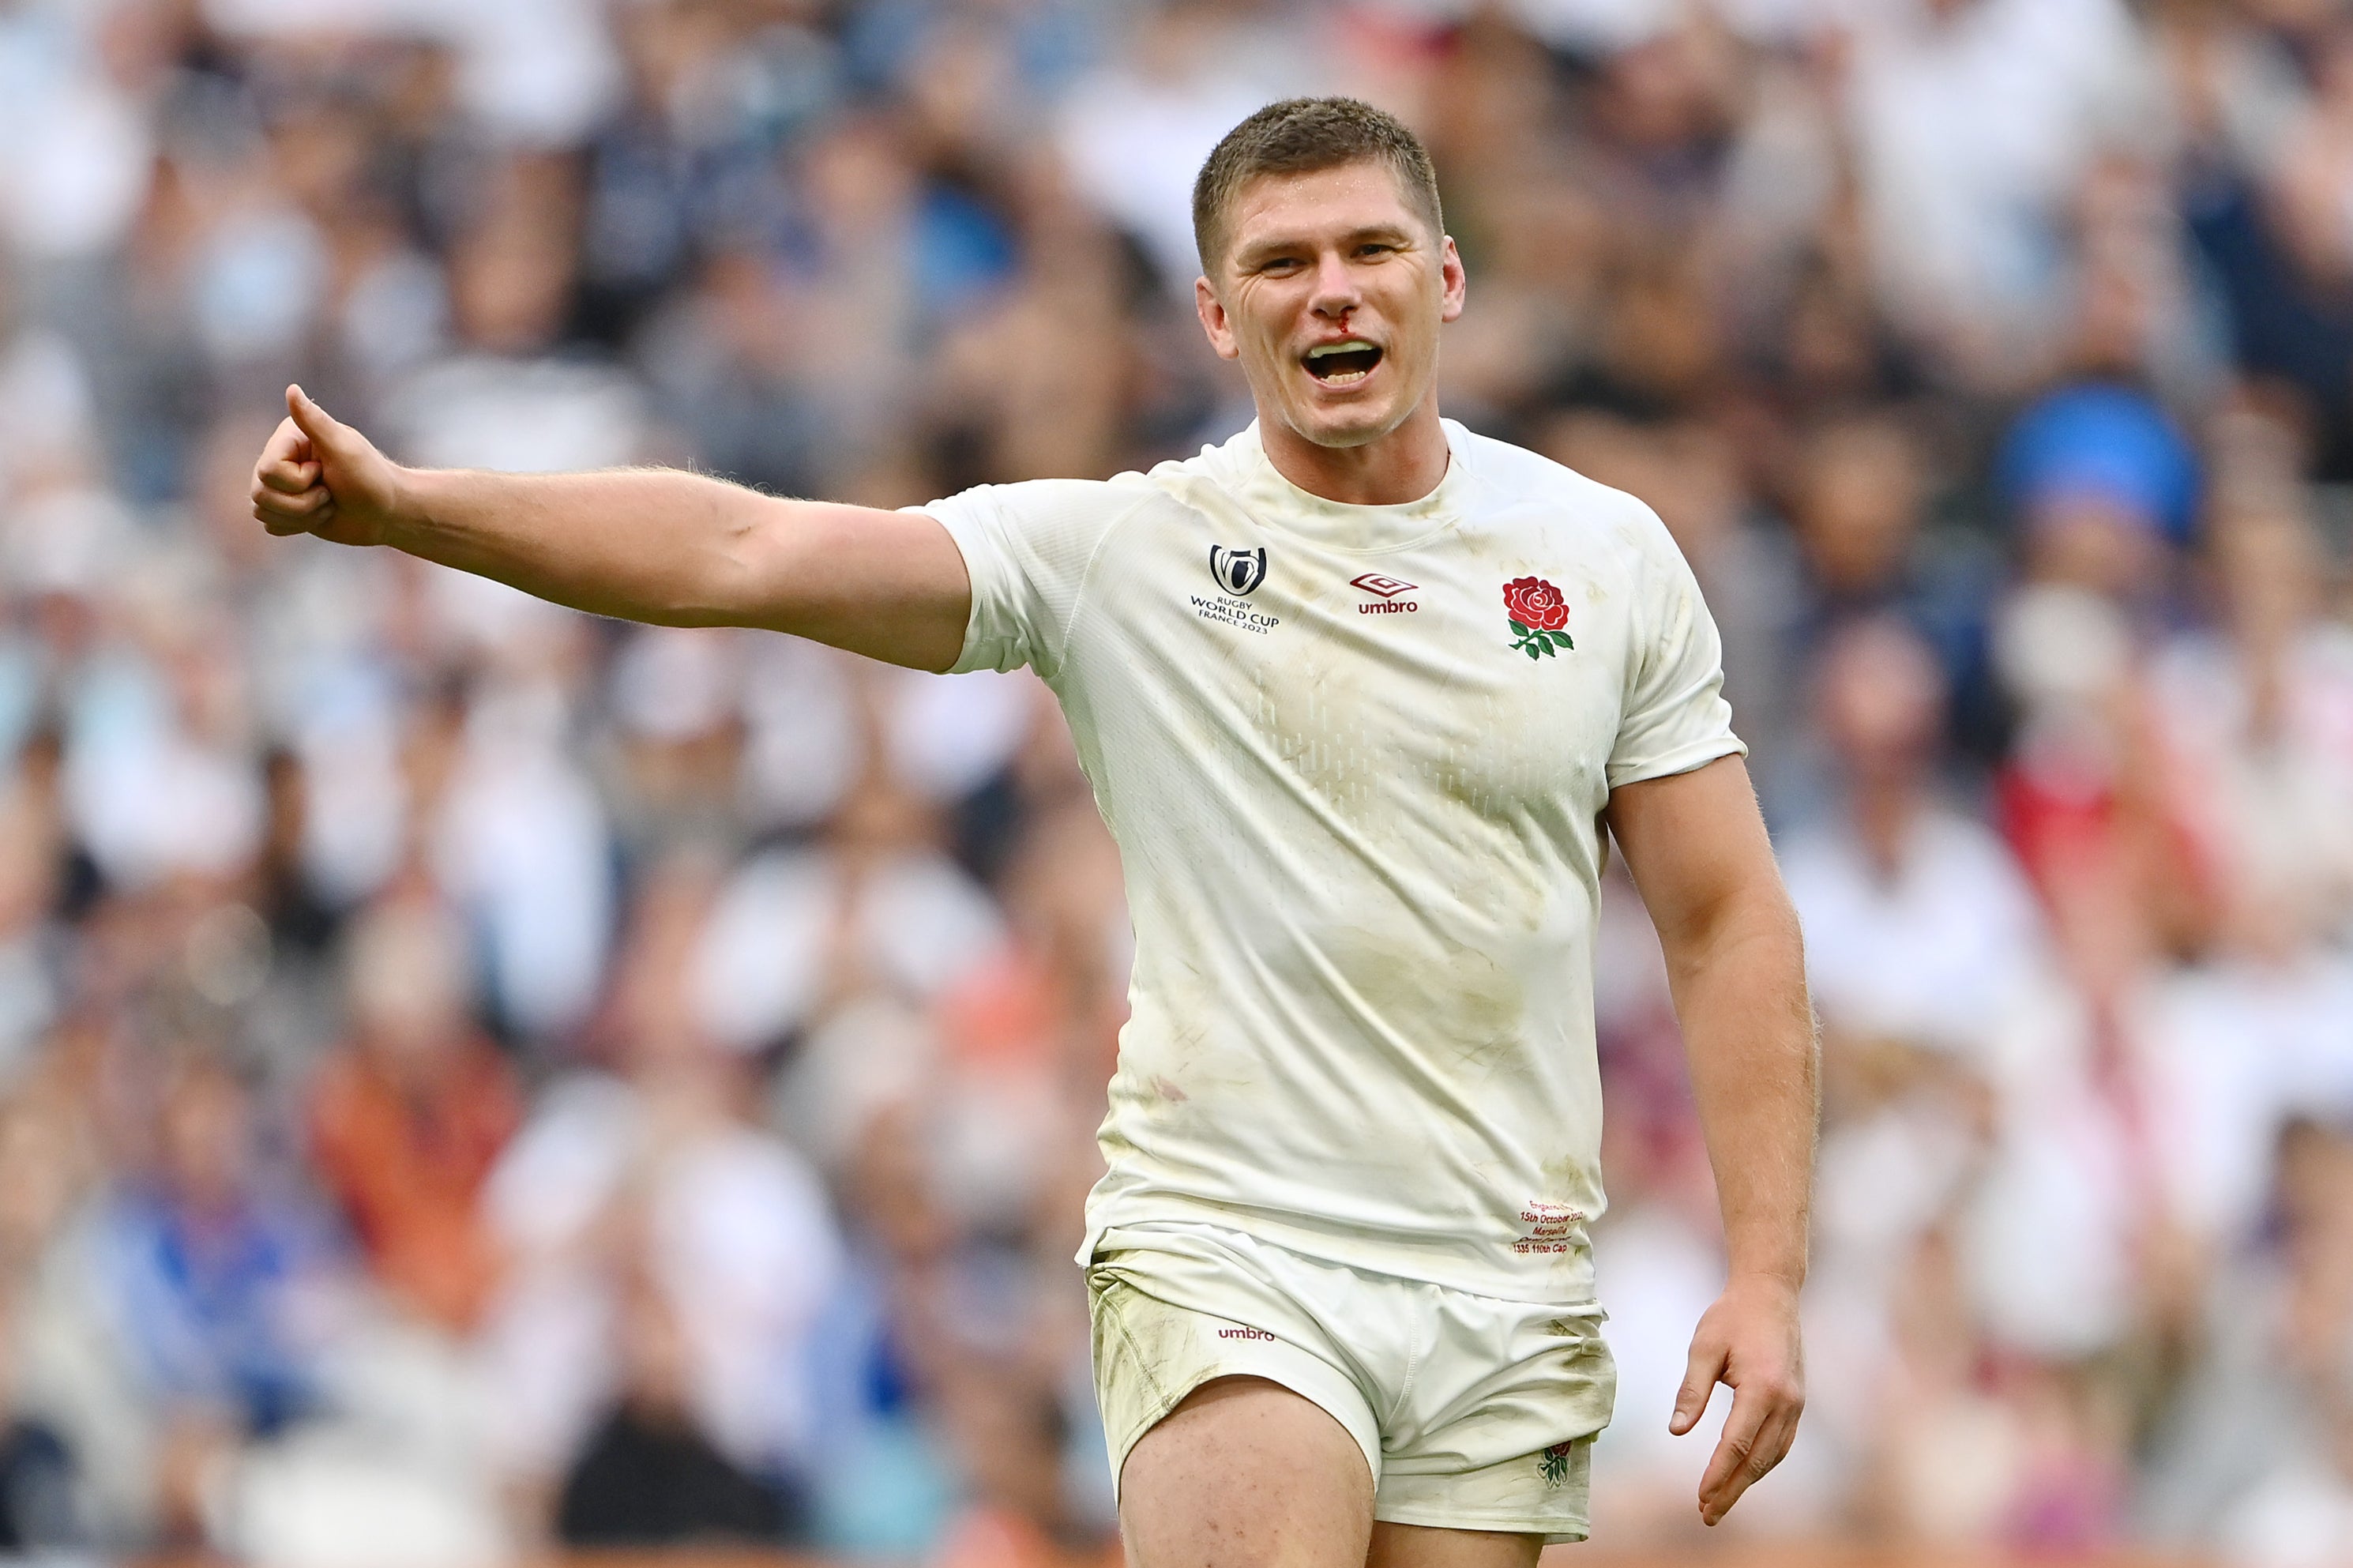 Owen Farrell inspired his England side to glory